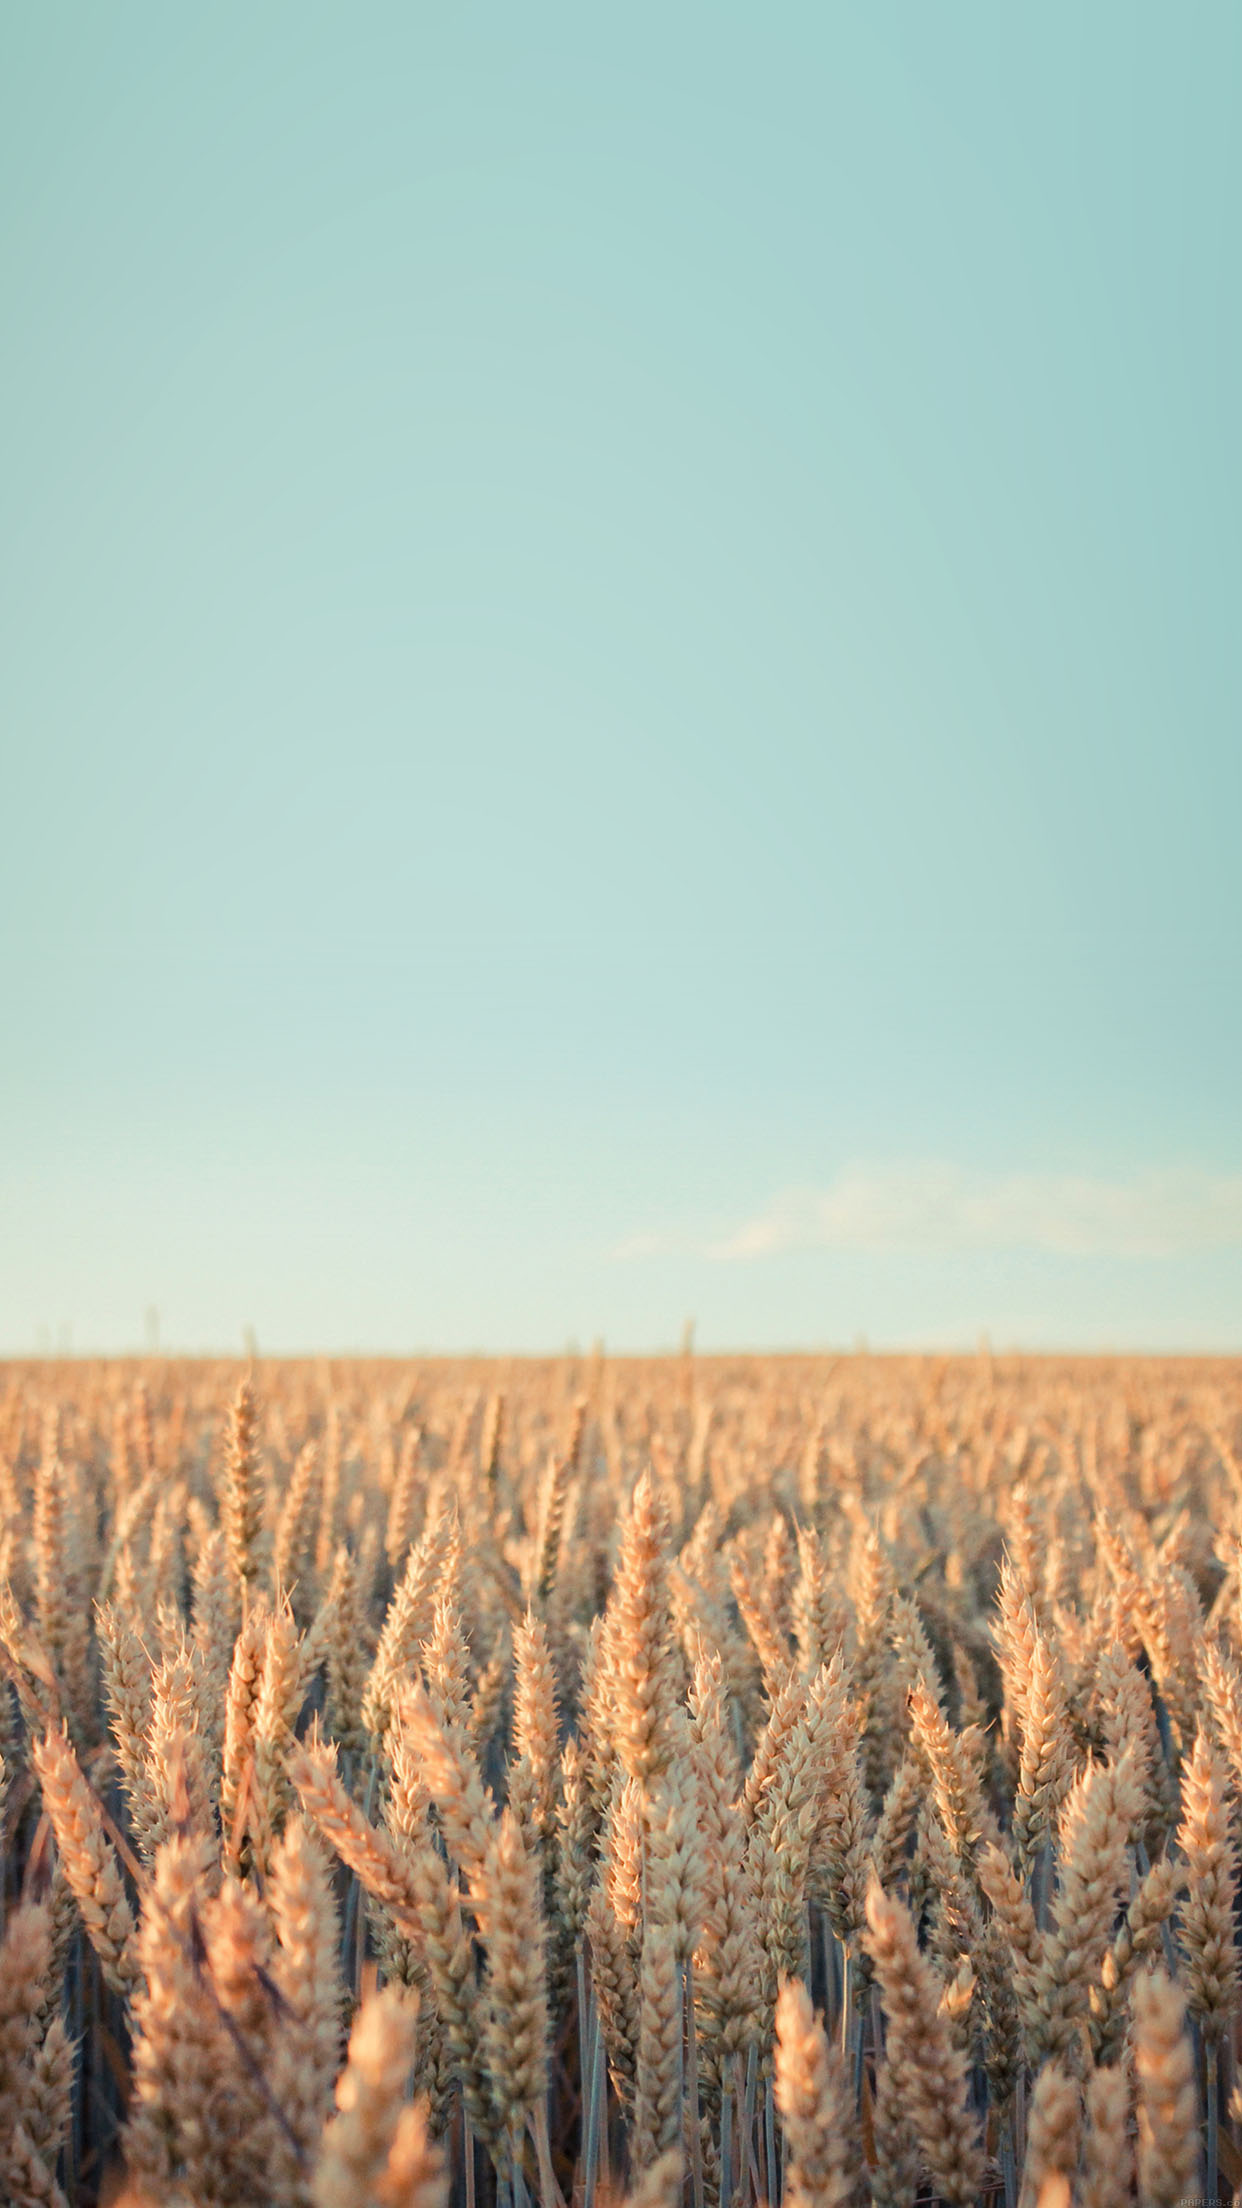 Wallpaper Android Rye Field Sky Nature Android wallpaper